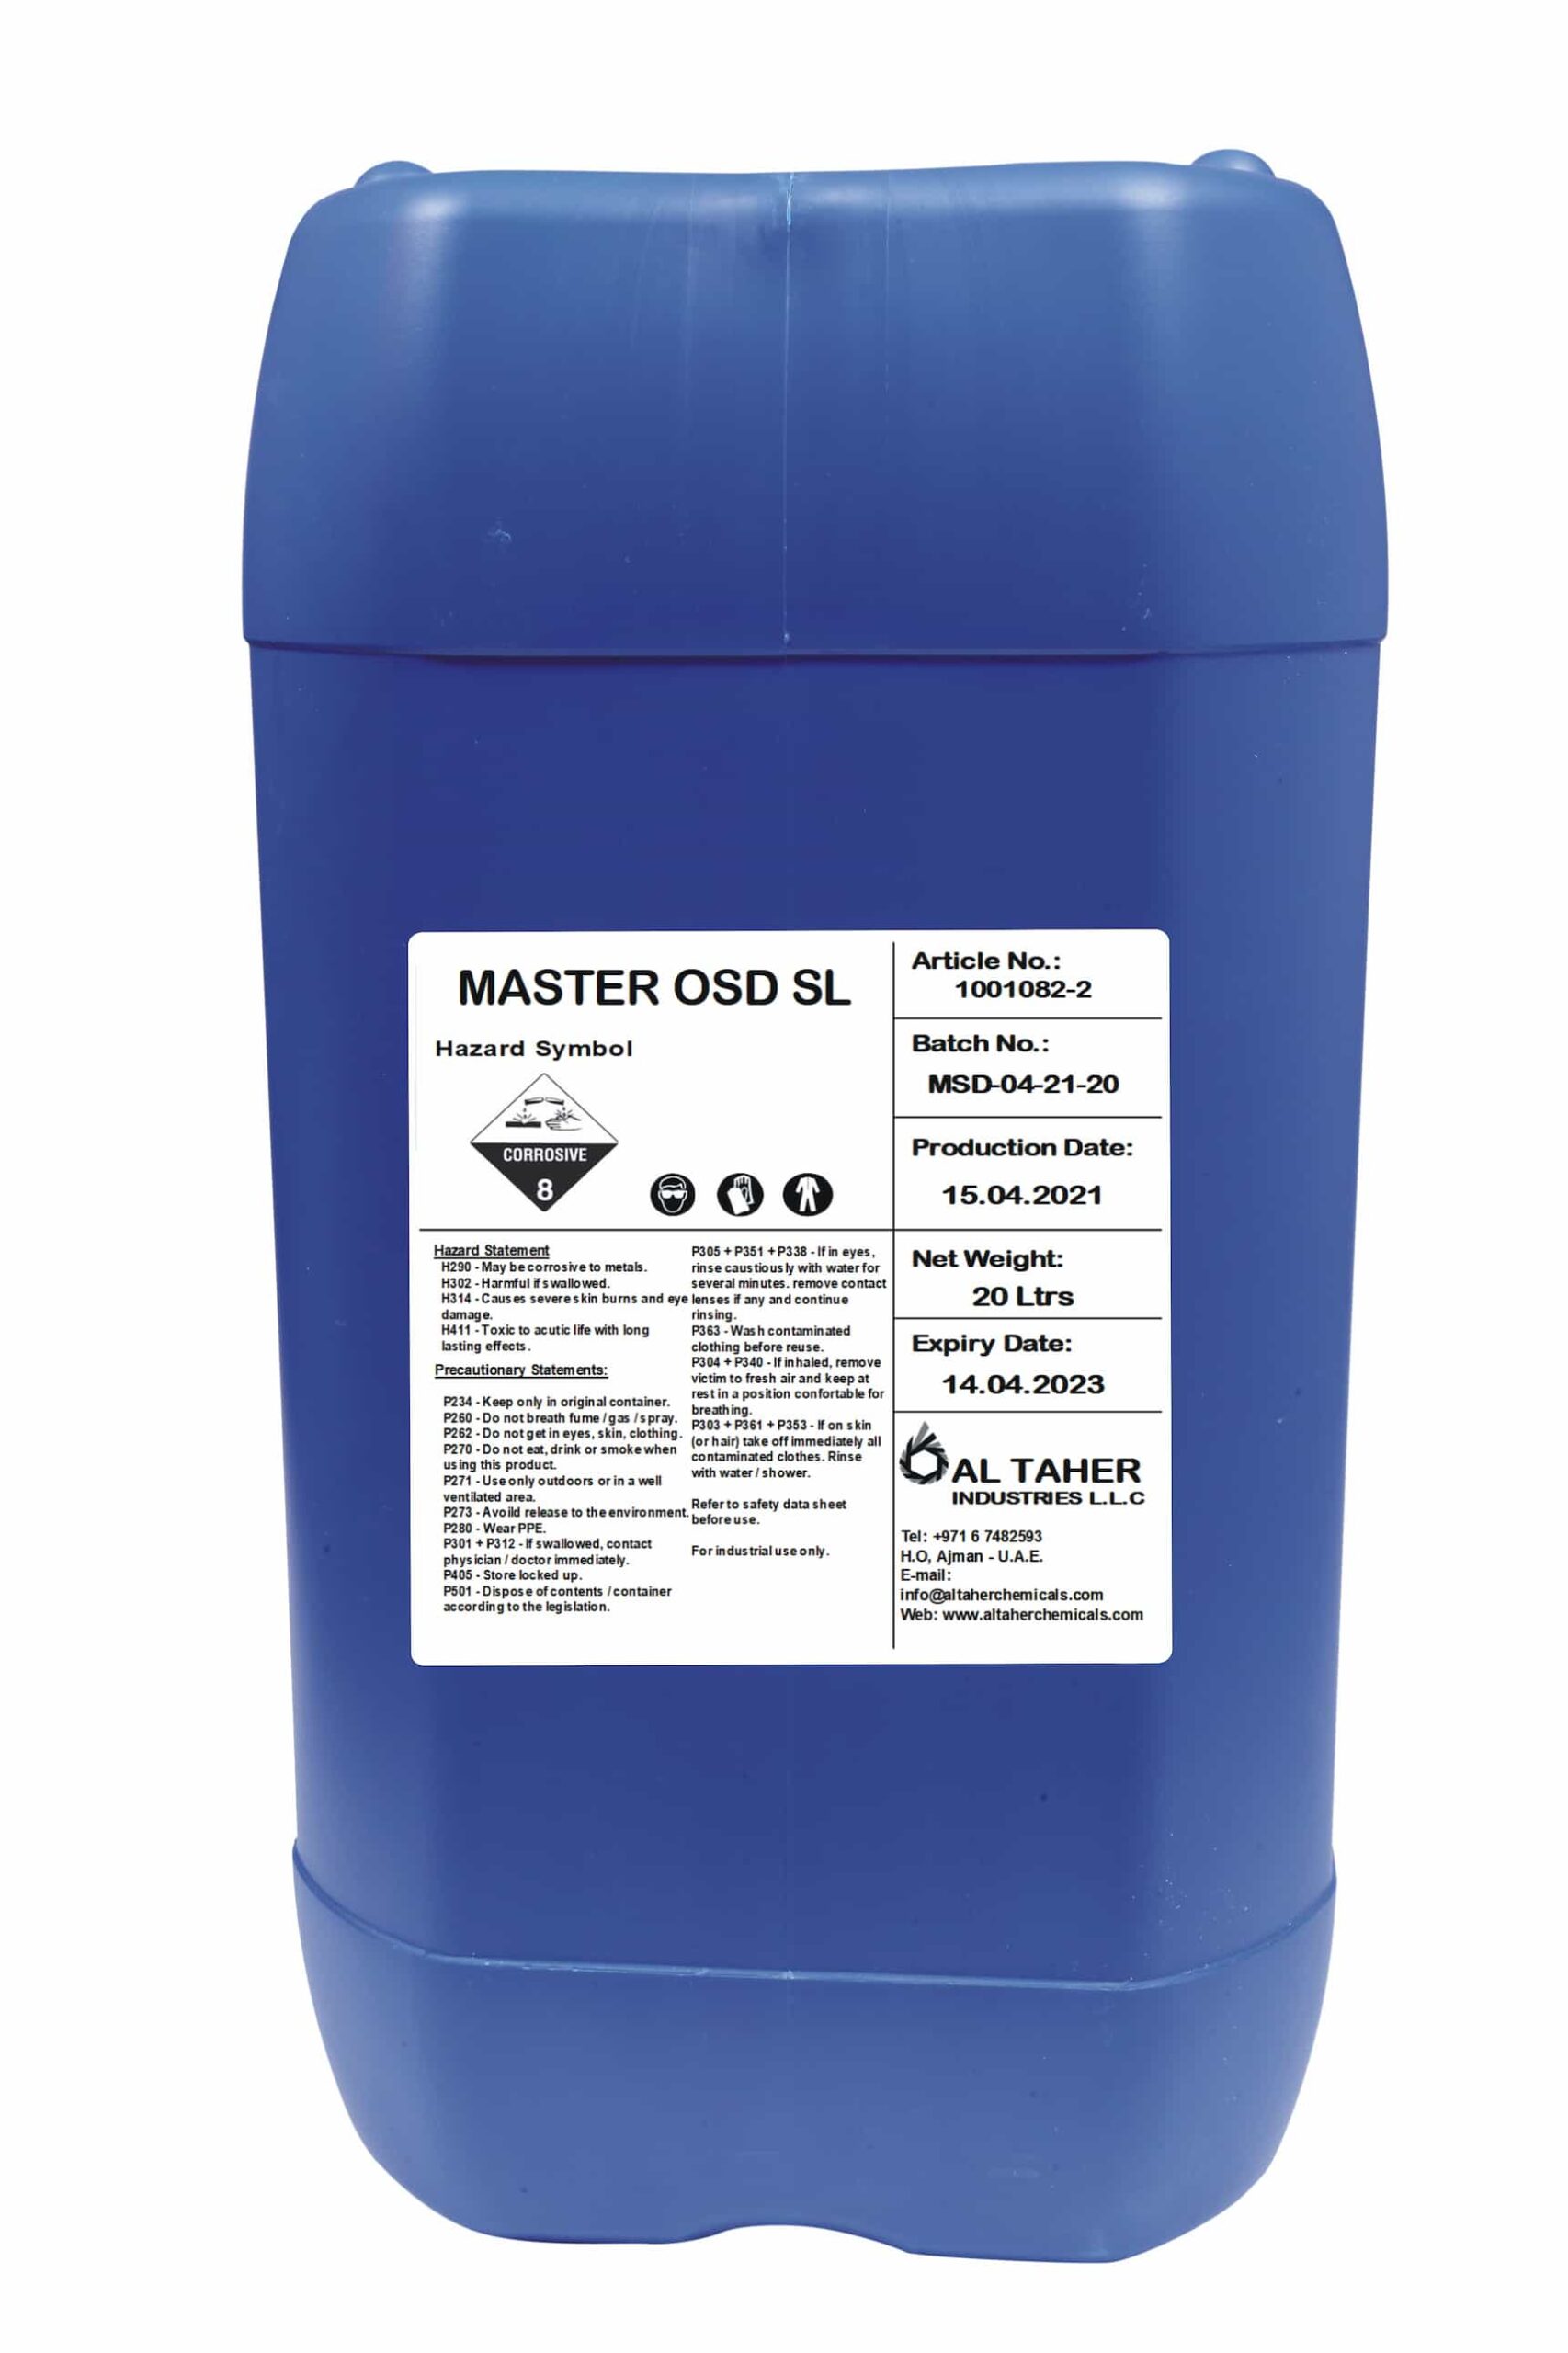 Master OSD SL: Superior Oil Spill Dispersant for Rapid Response and Environmental Protection in Challenging Situations